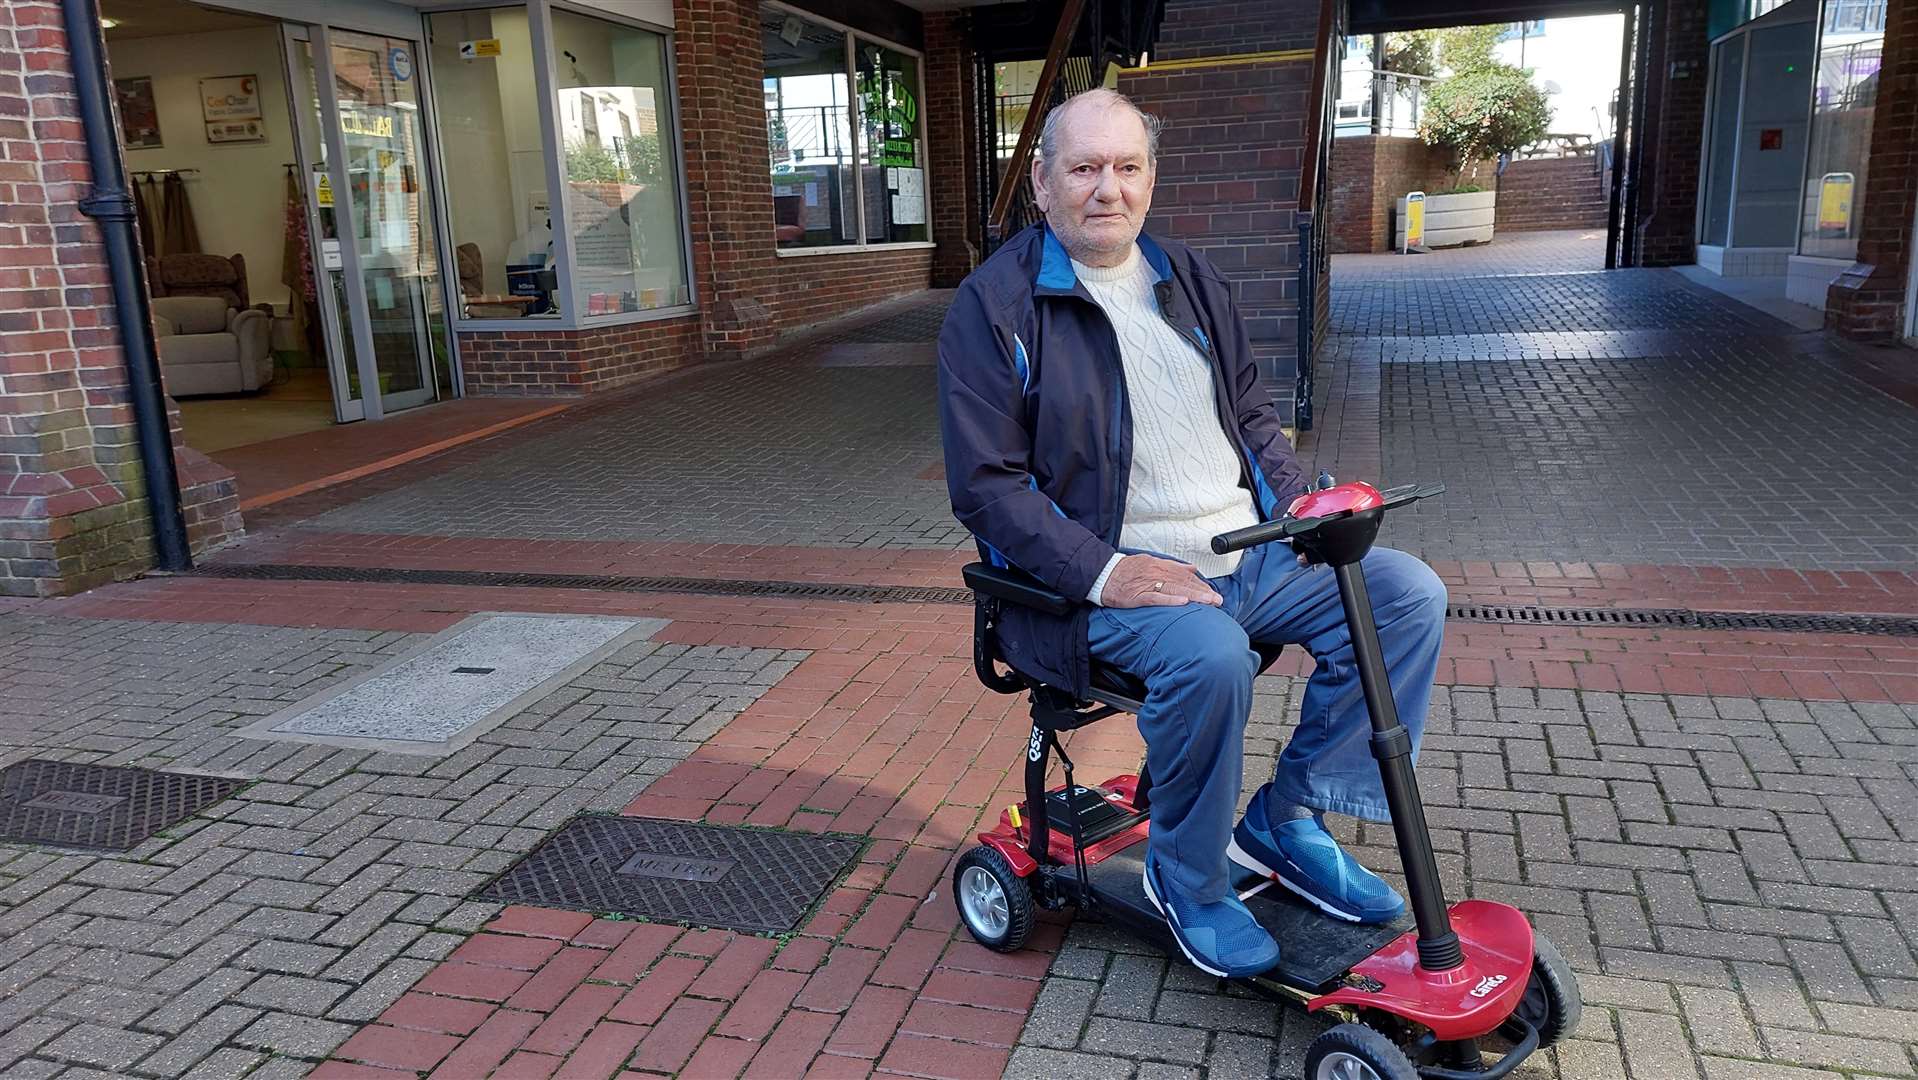 Scooter user Geoff Hayes from Willesborough